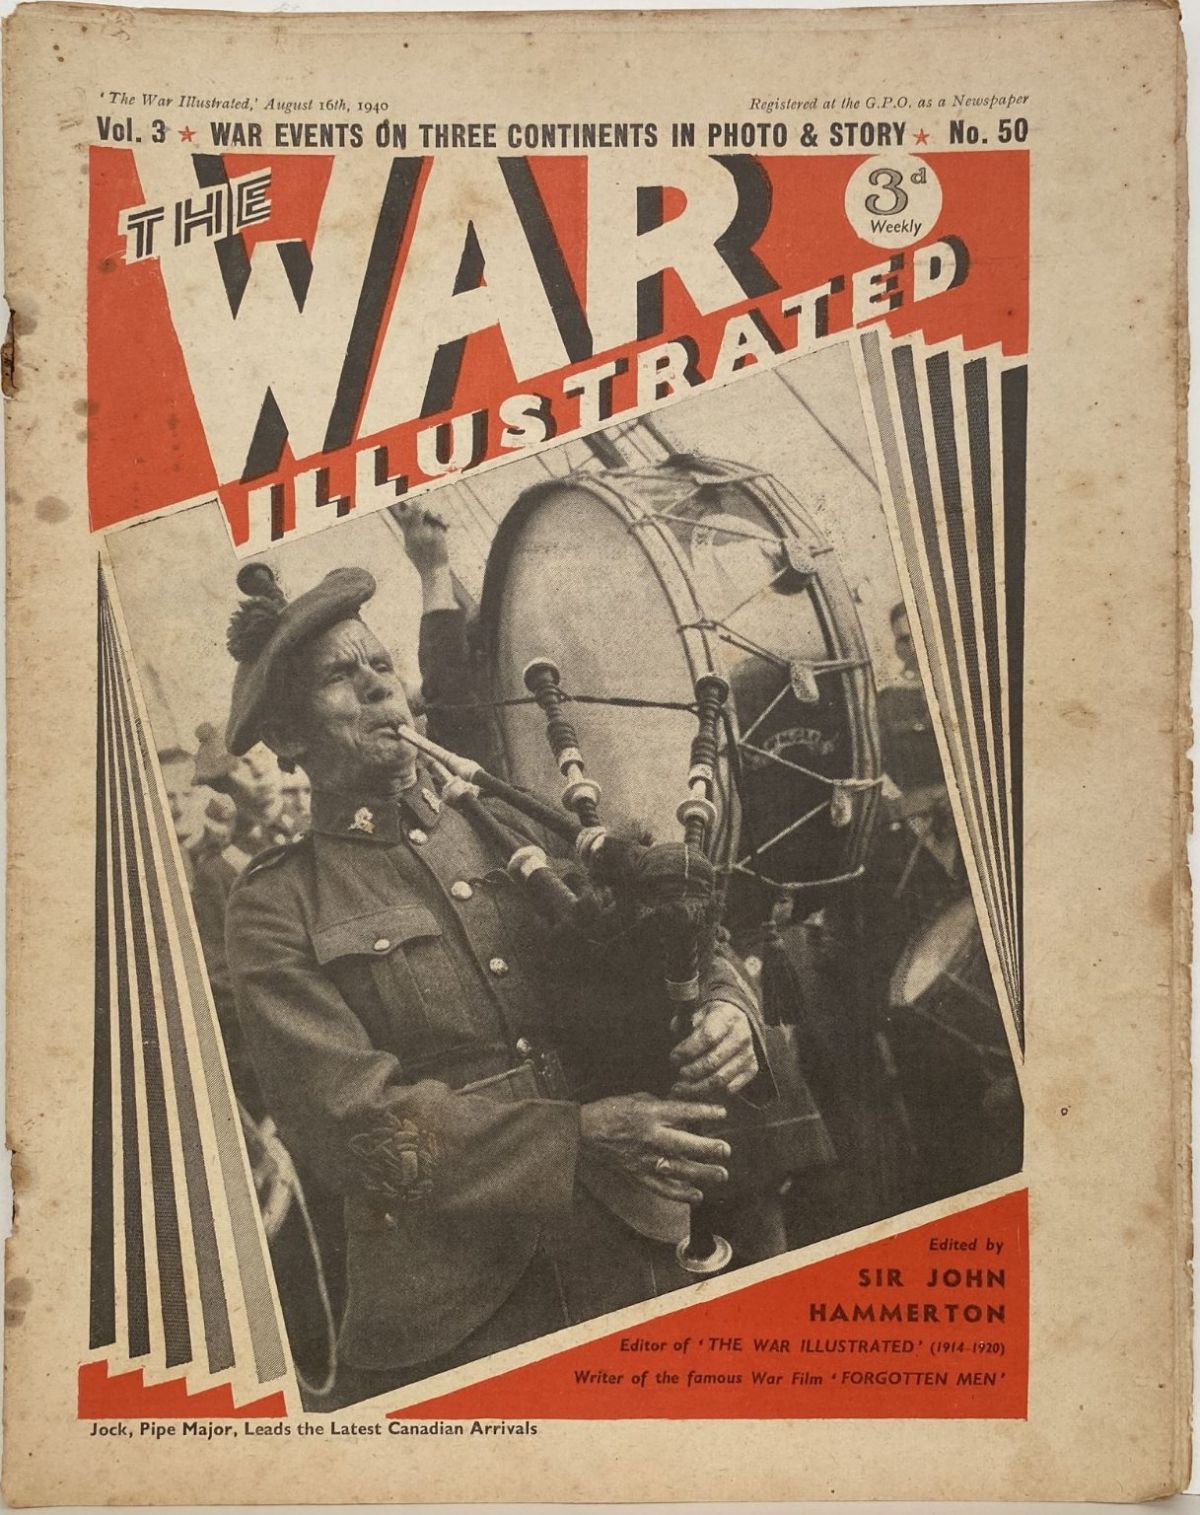 THE WAR ILLUSTRATED - Vol 3, No 50, 16th Aug 1940